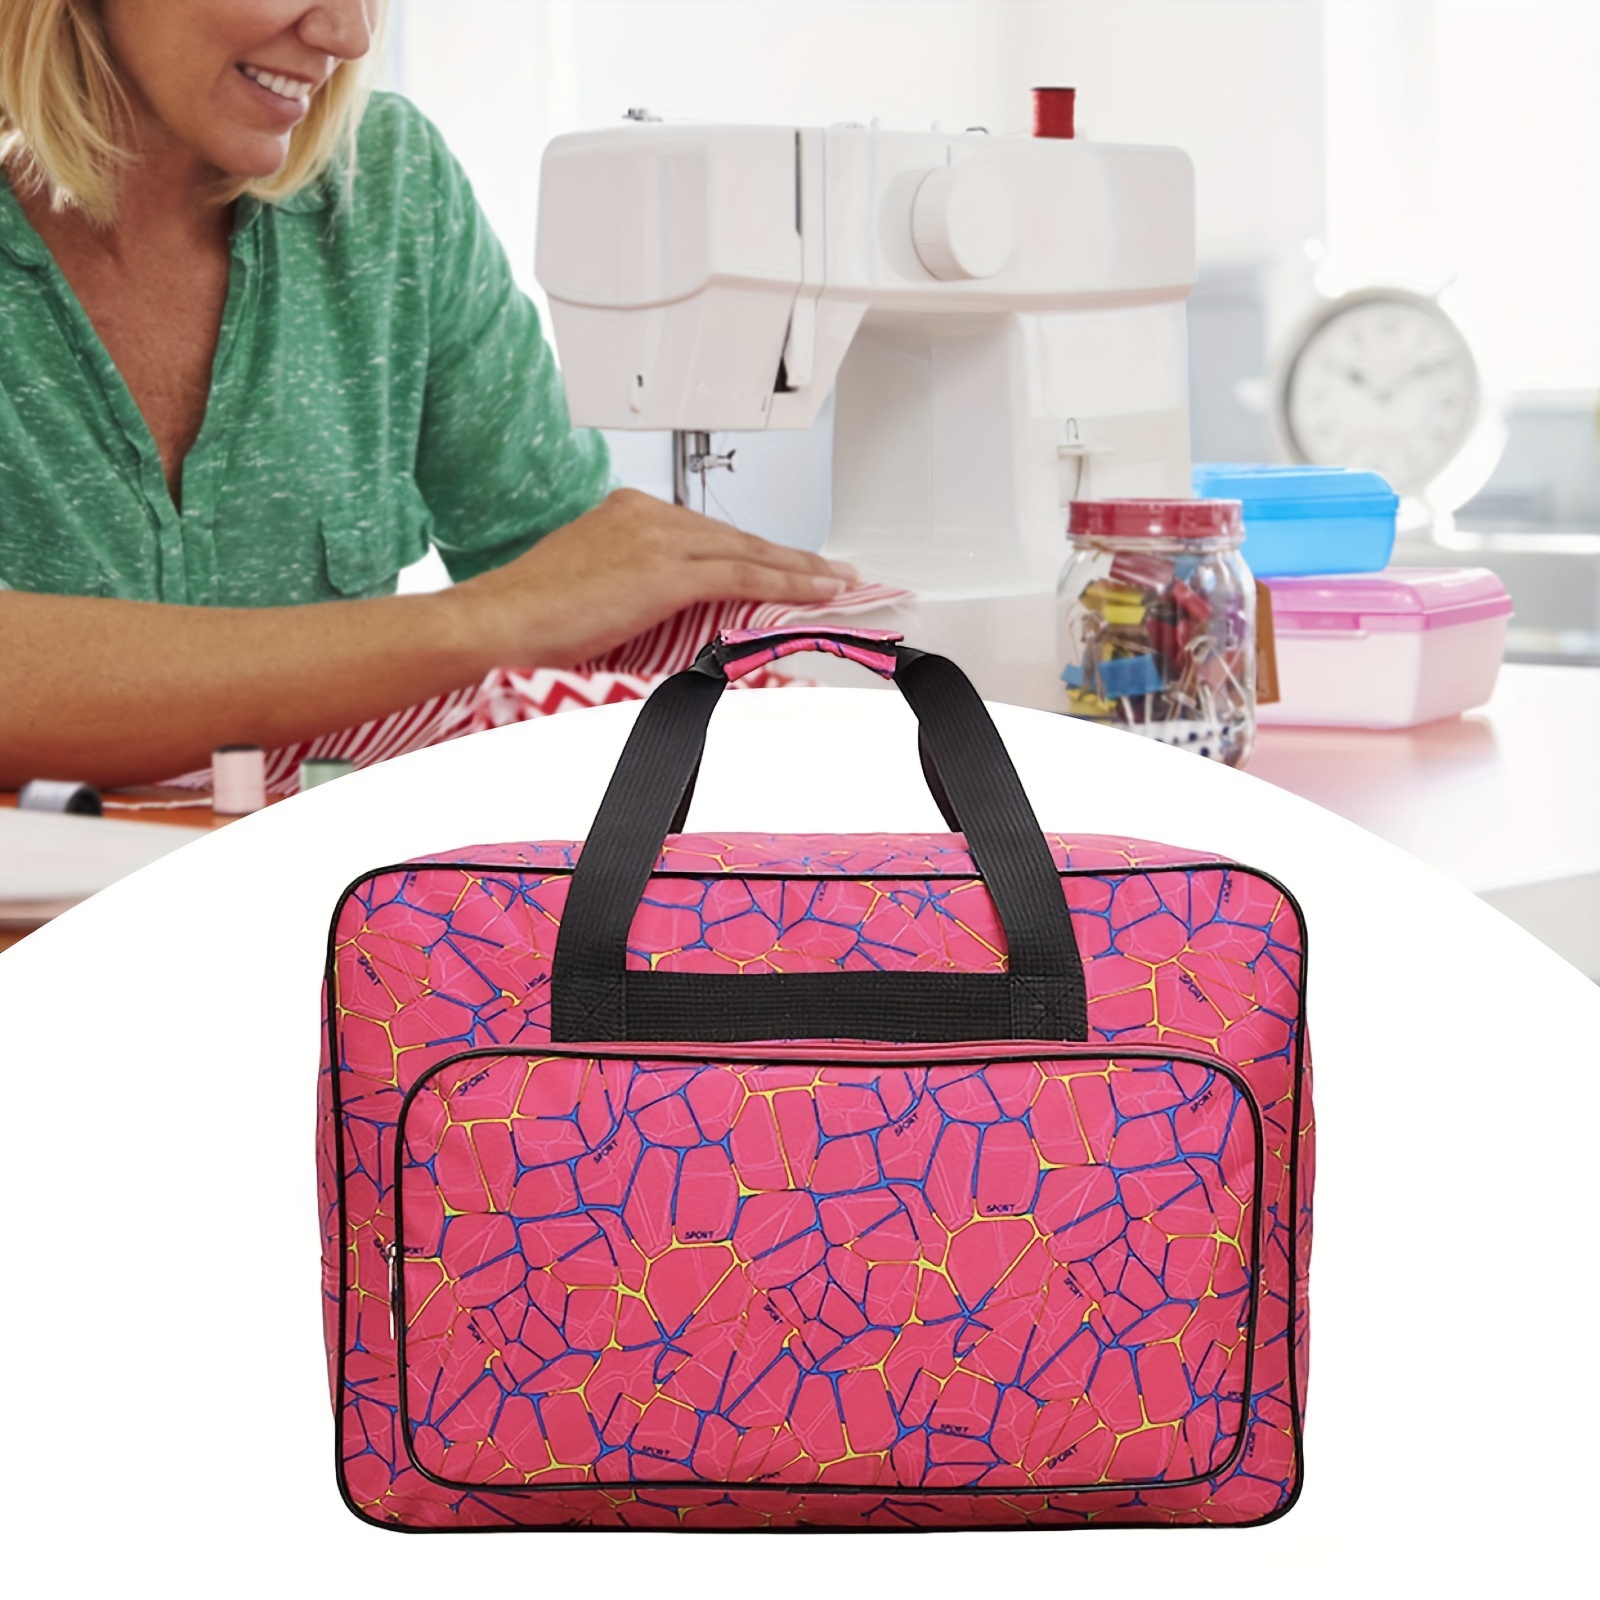 

1pc Sewing Machine Carrying Case, Portable Overlocker Storage Bag, Universal Carry Tote Bag, Portable Storage Dust Cover With Pockets, For Most Sewing Machines